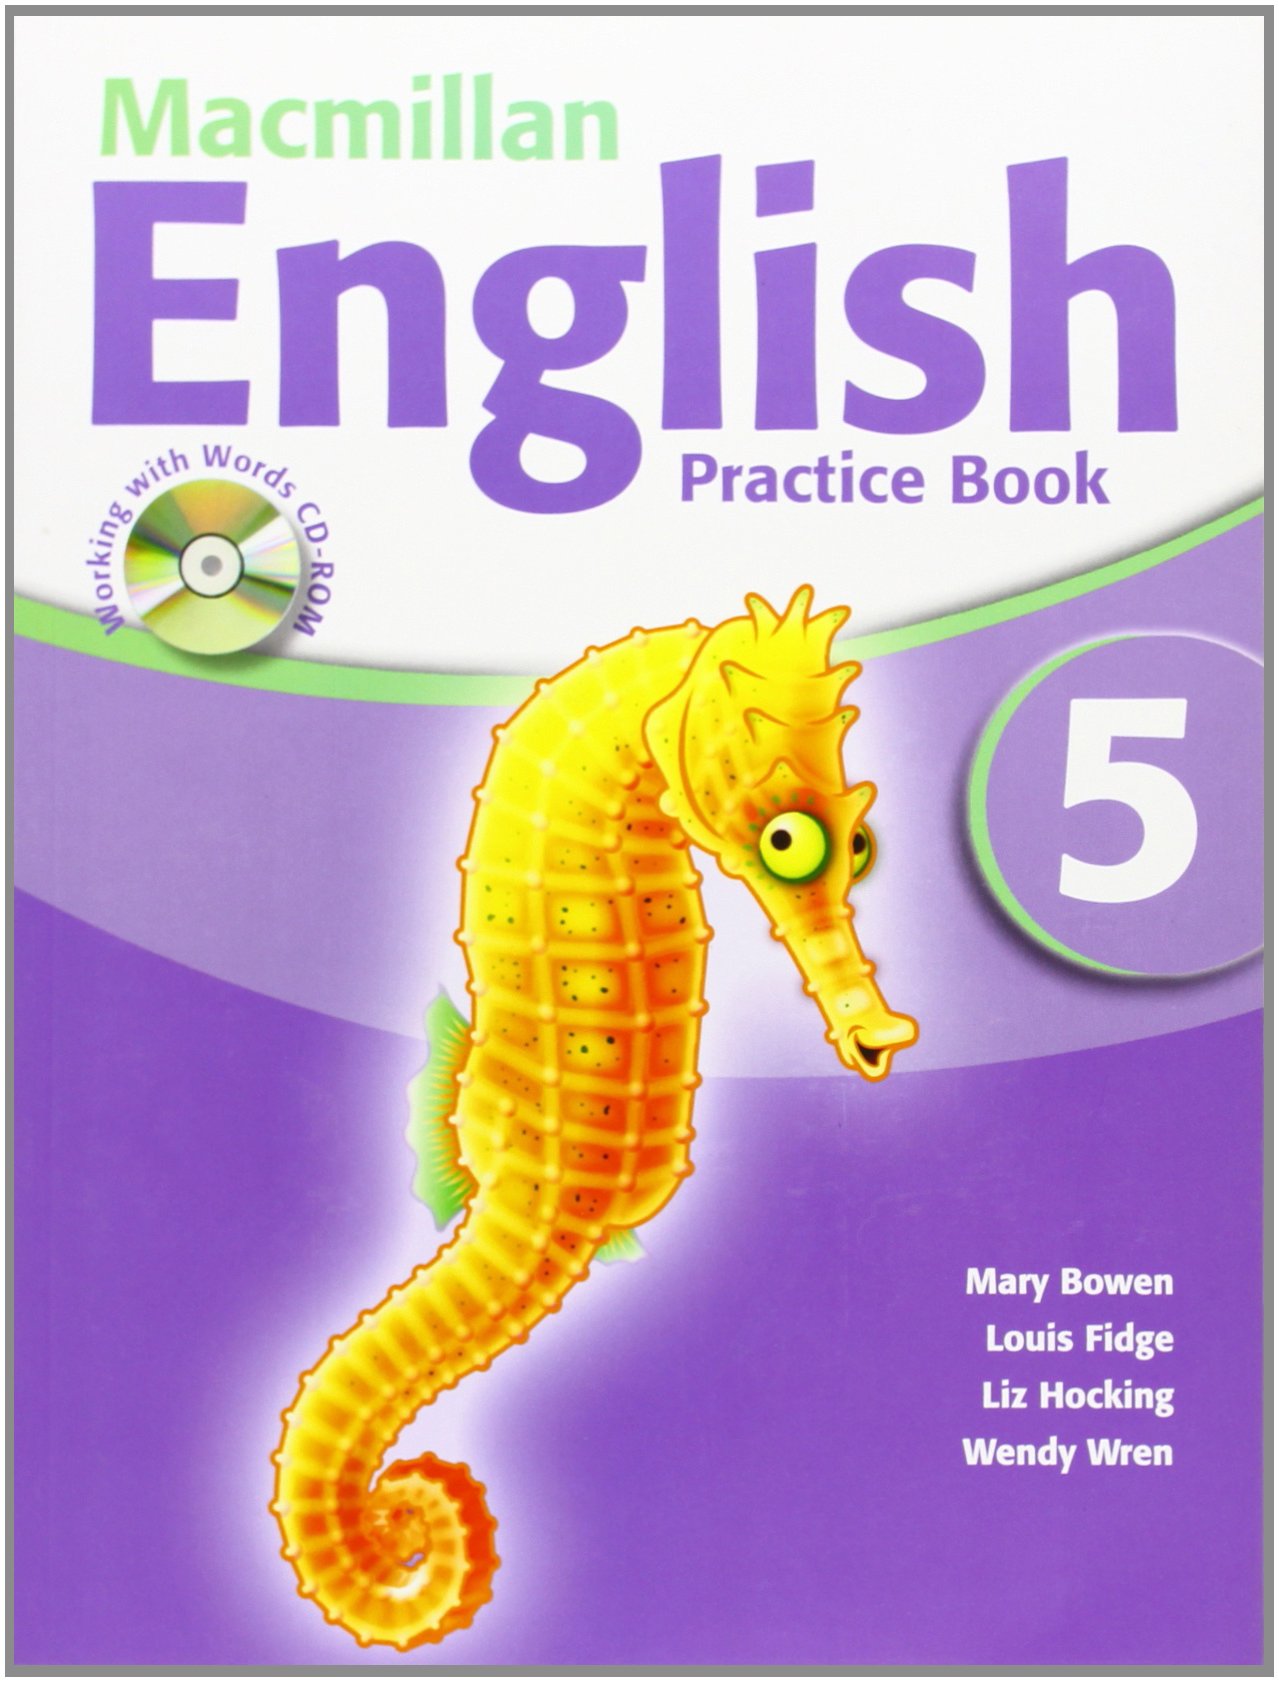 Macmillan English - Practice Book and CD-ROM Pack - Level 5